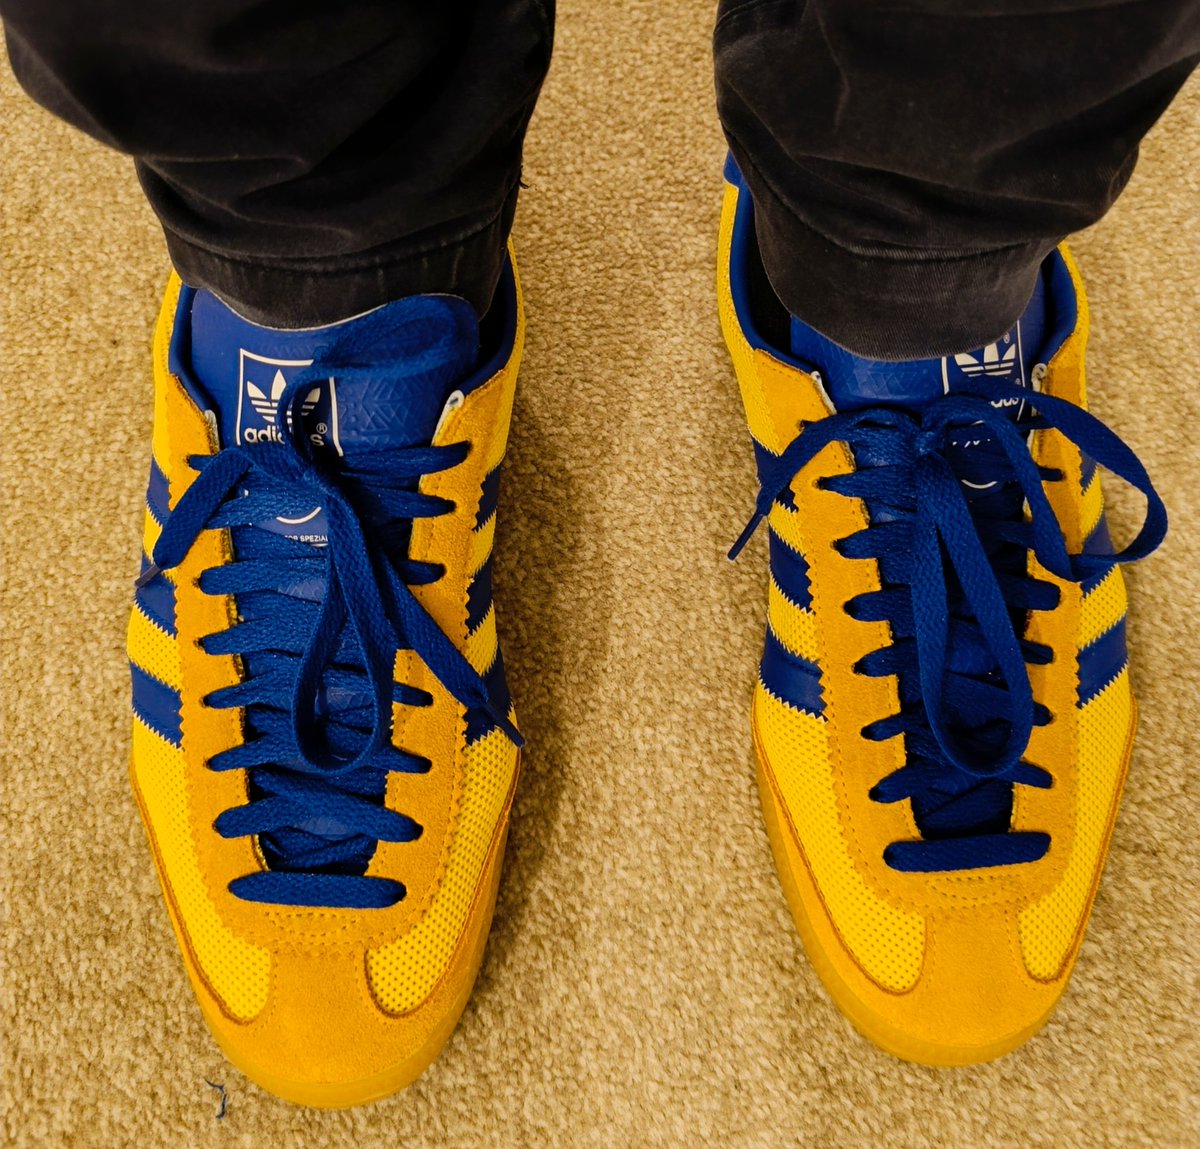 I don't think there was Universal love for these on release (complaints about the toebox if I remember), but for me they are one of the best recent Spzl releases. Malmö Net